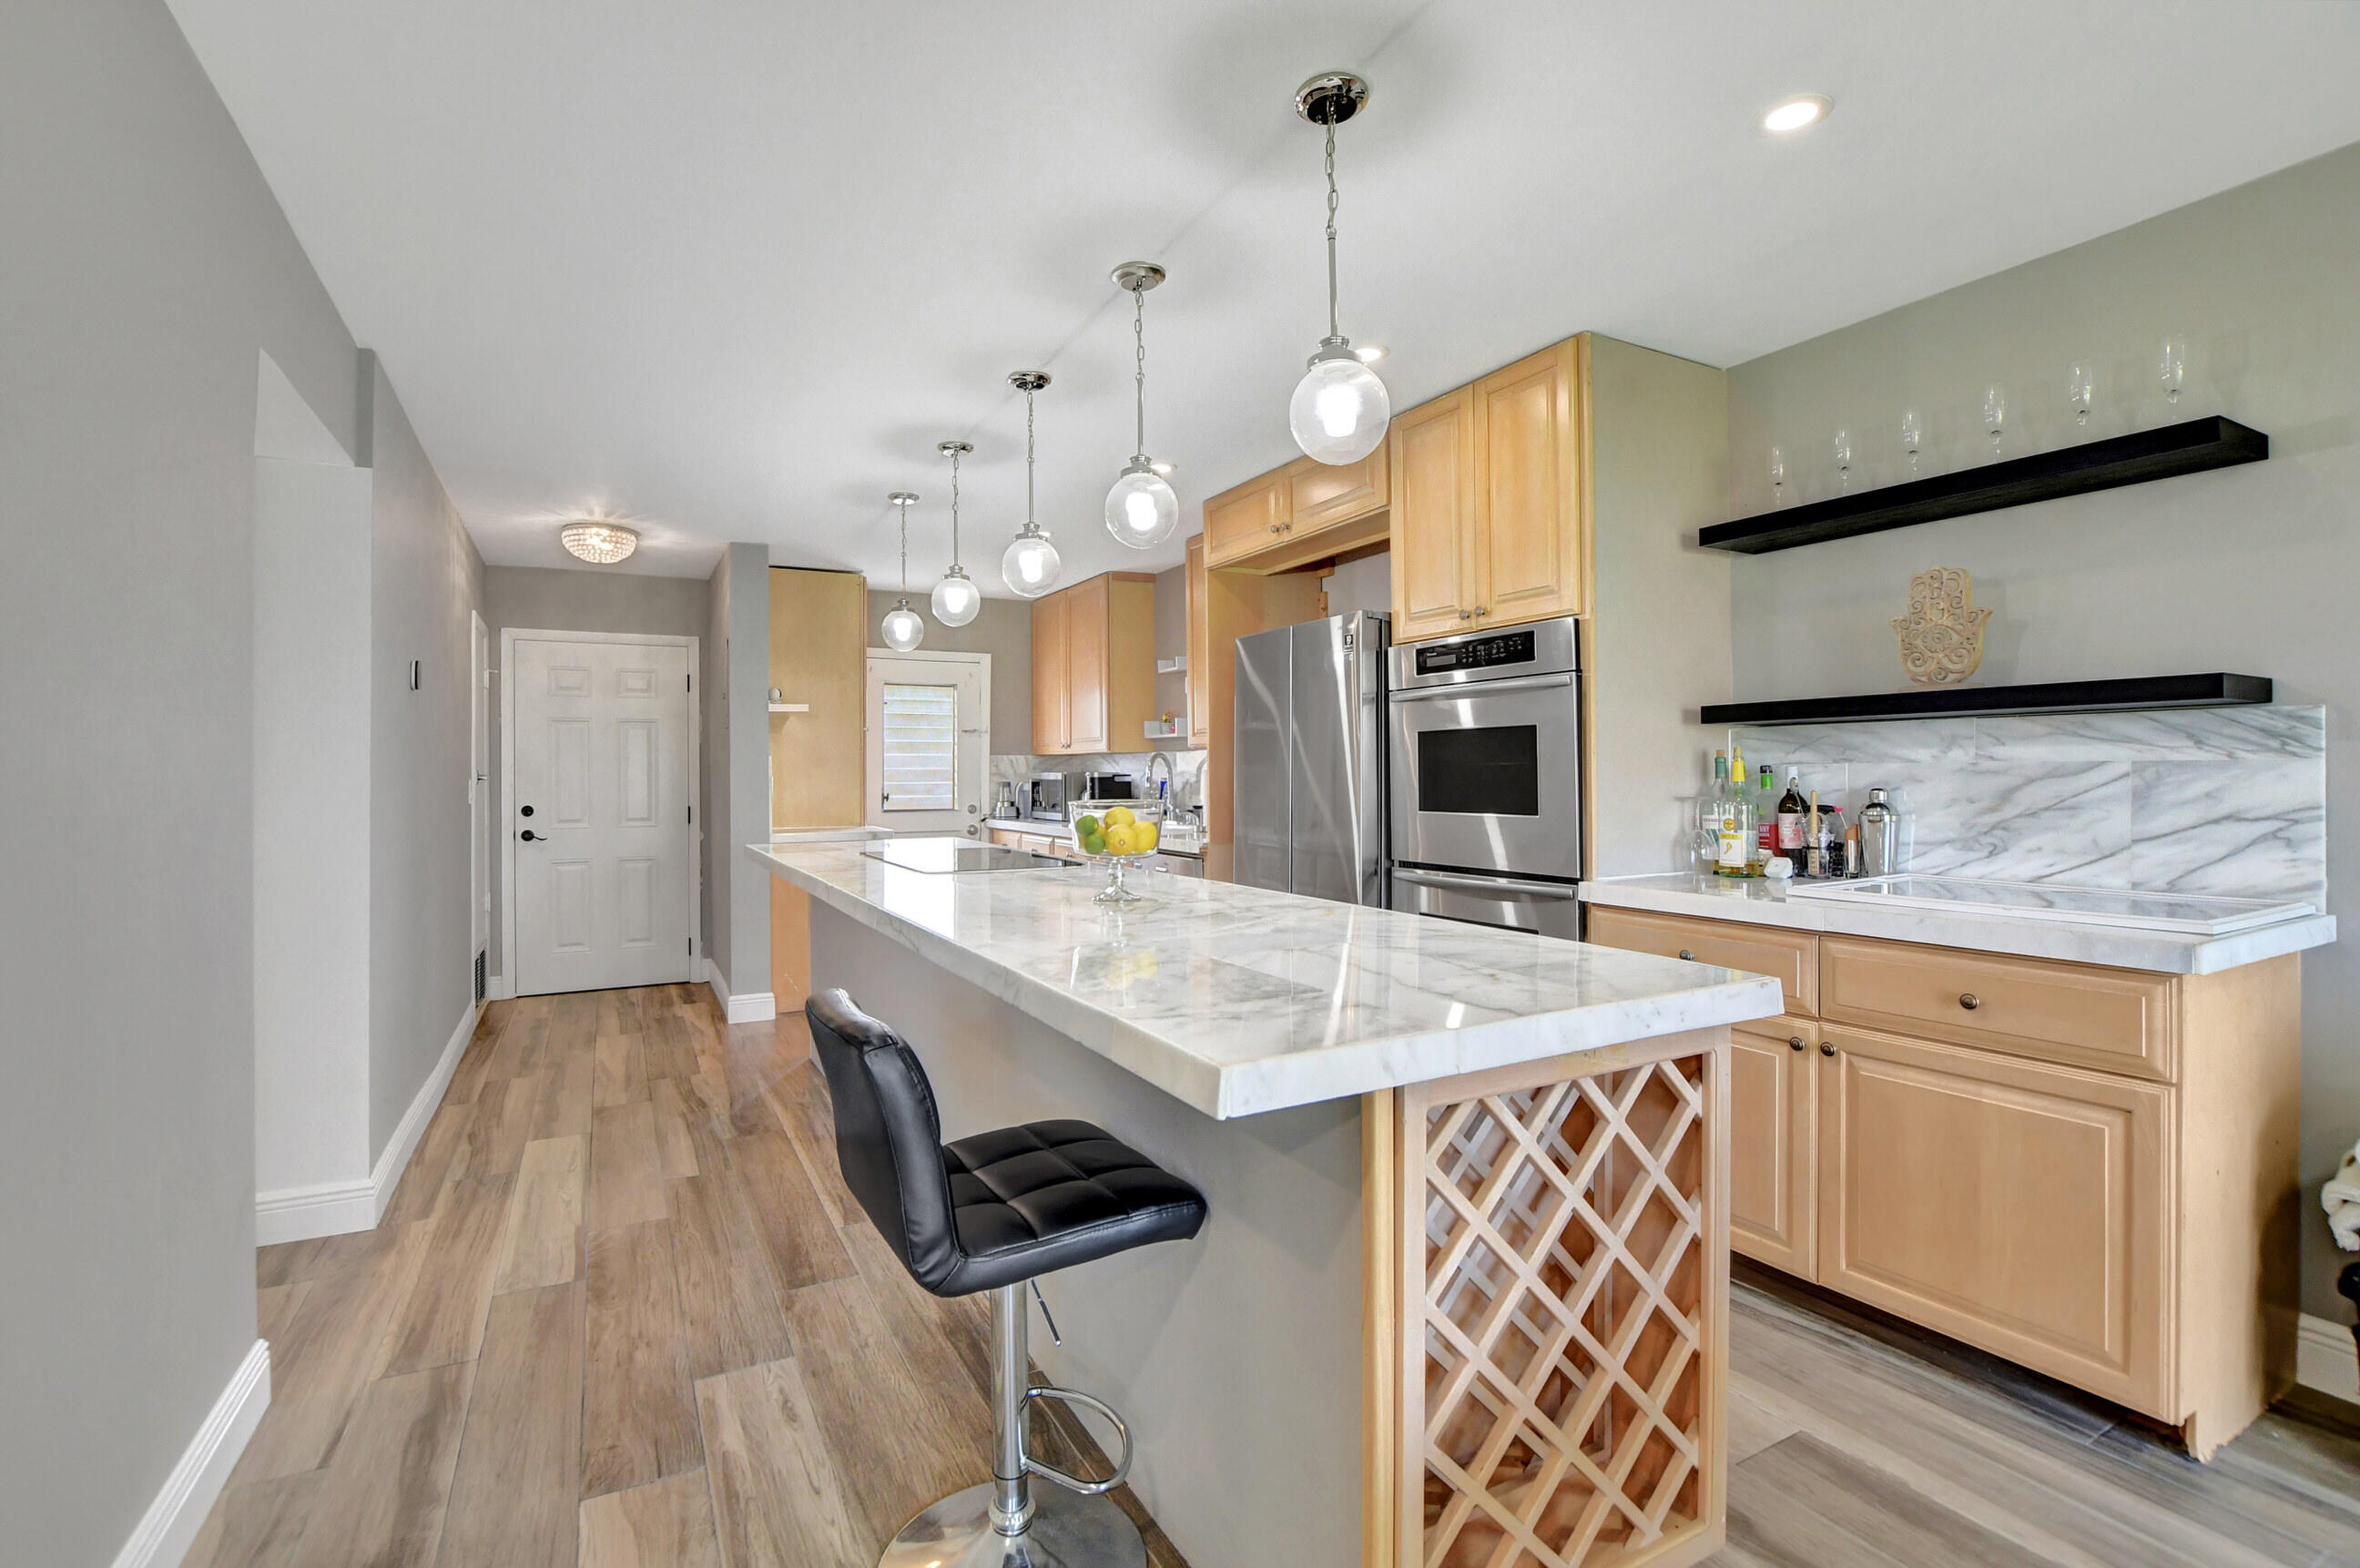 a large kitchen with stainless steel appliances kitchen island granite countertop a sink a stove and a wooden floors